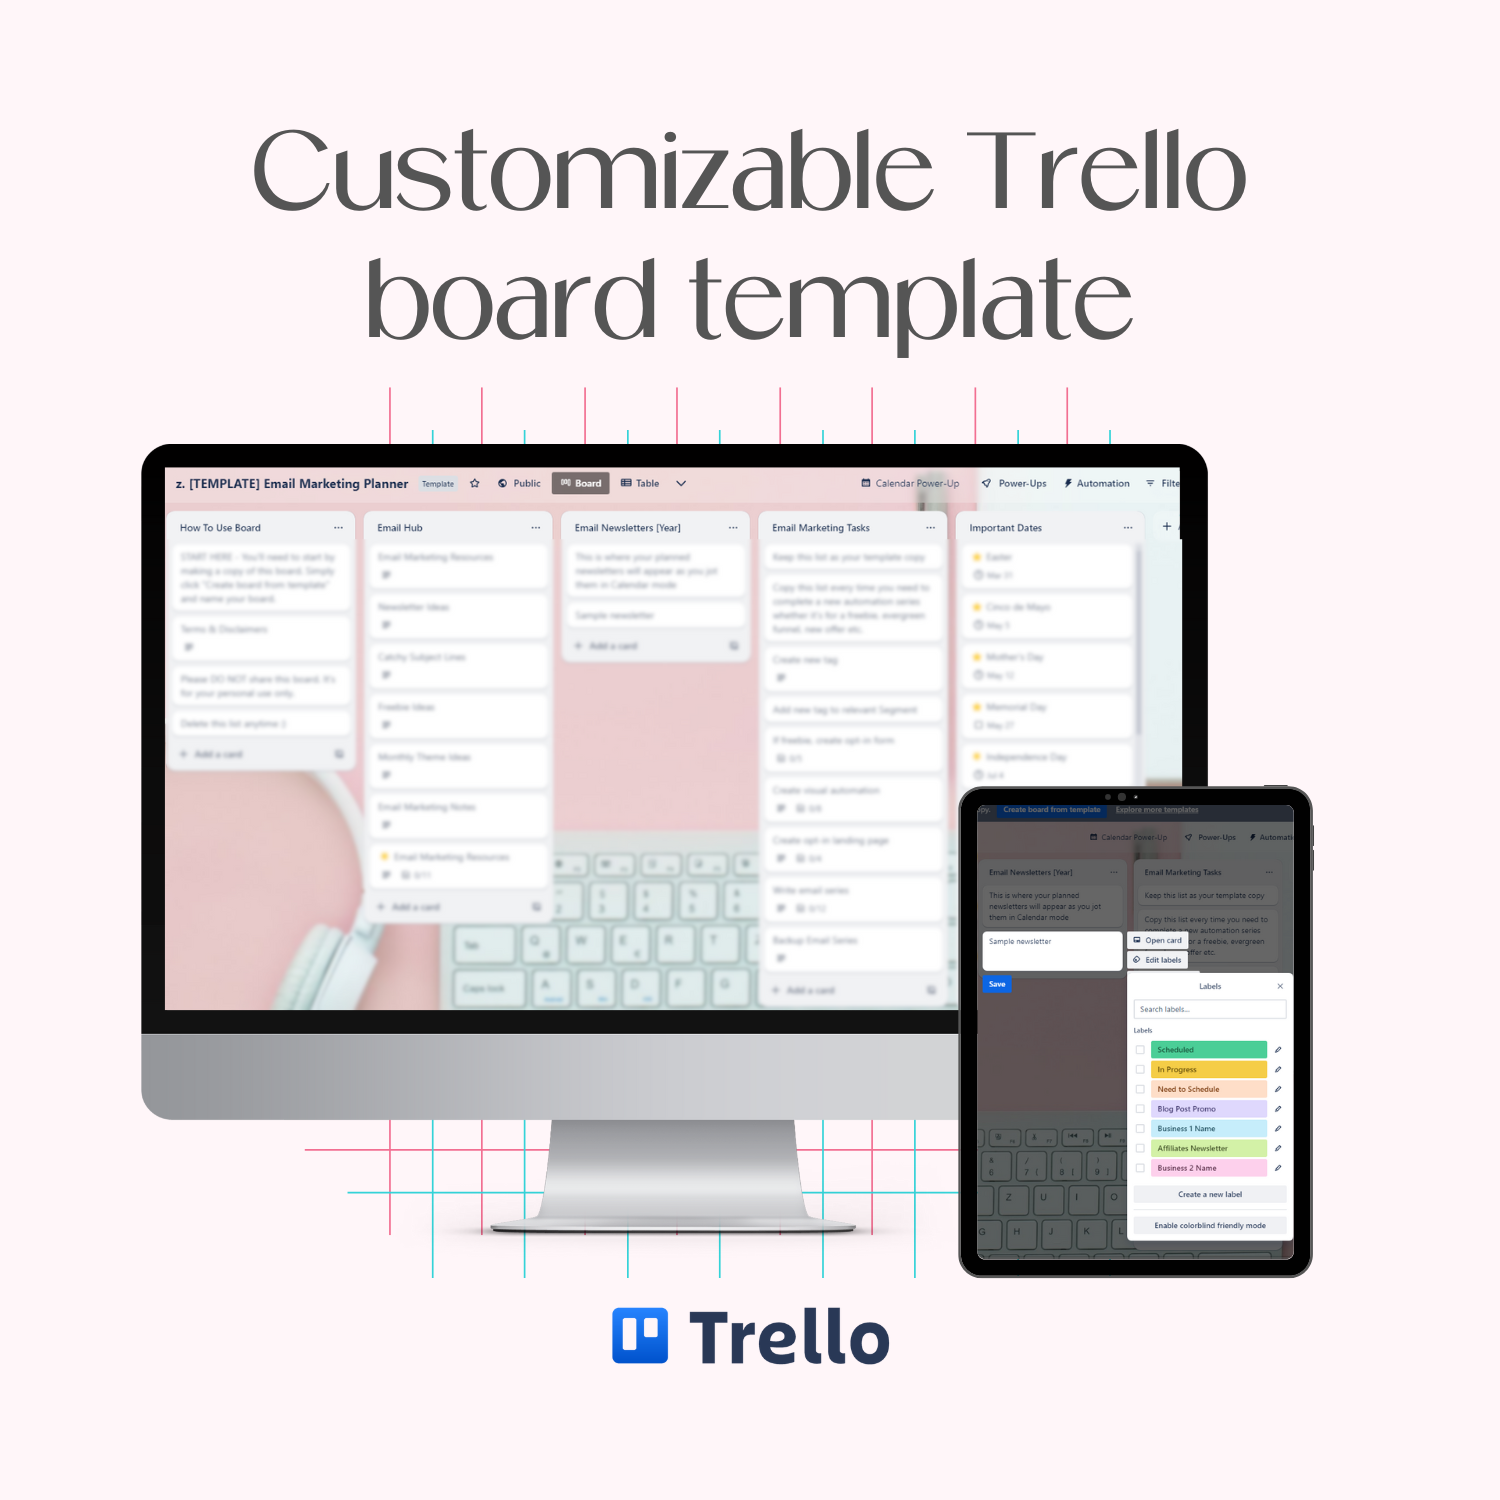 A monitor and tablet mockup displaying the customizable Email Marketing Planner Trello board template, along with the customized labels. 